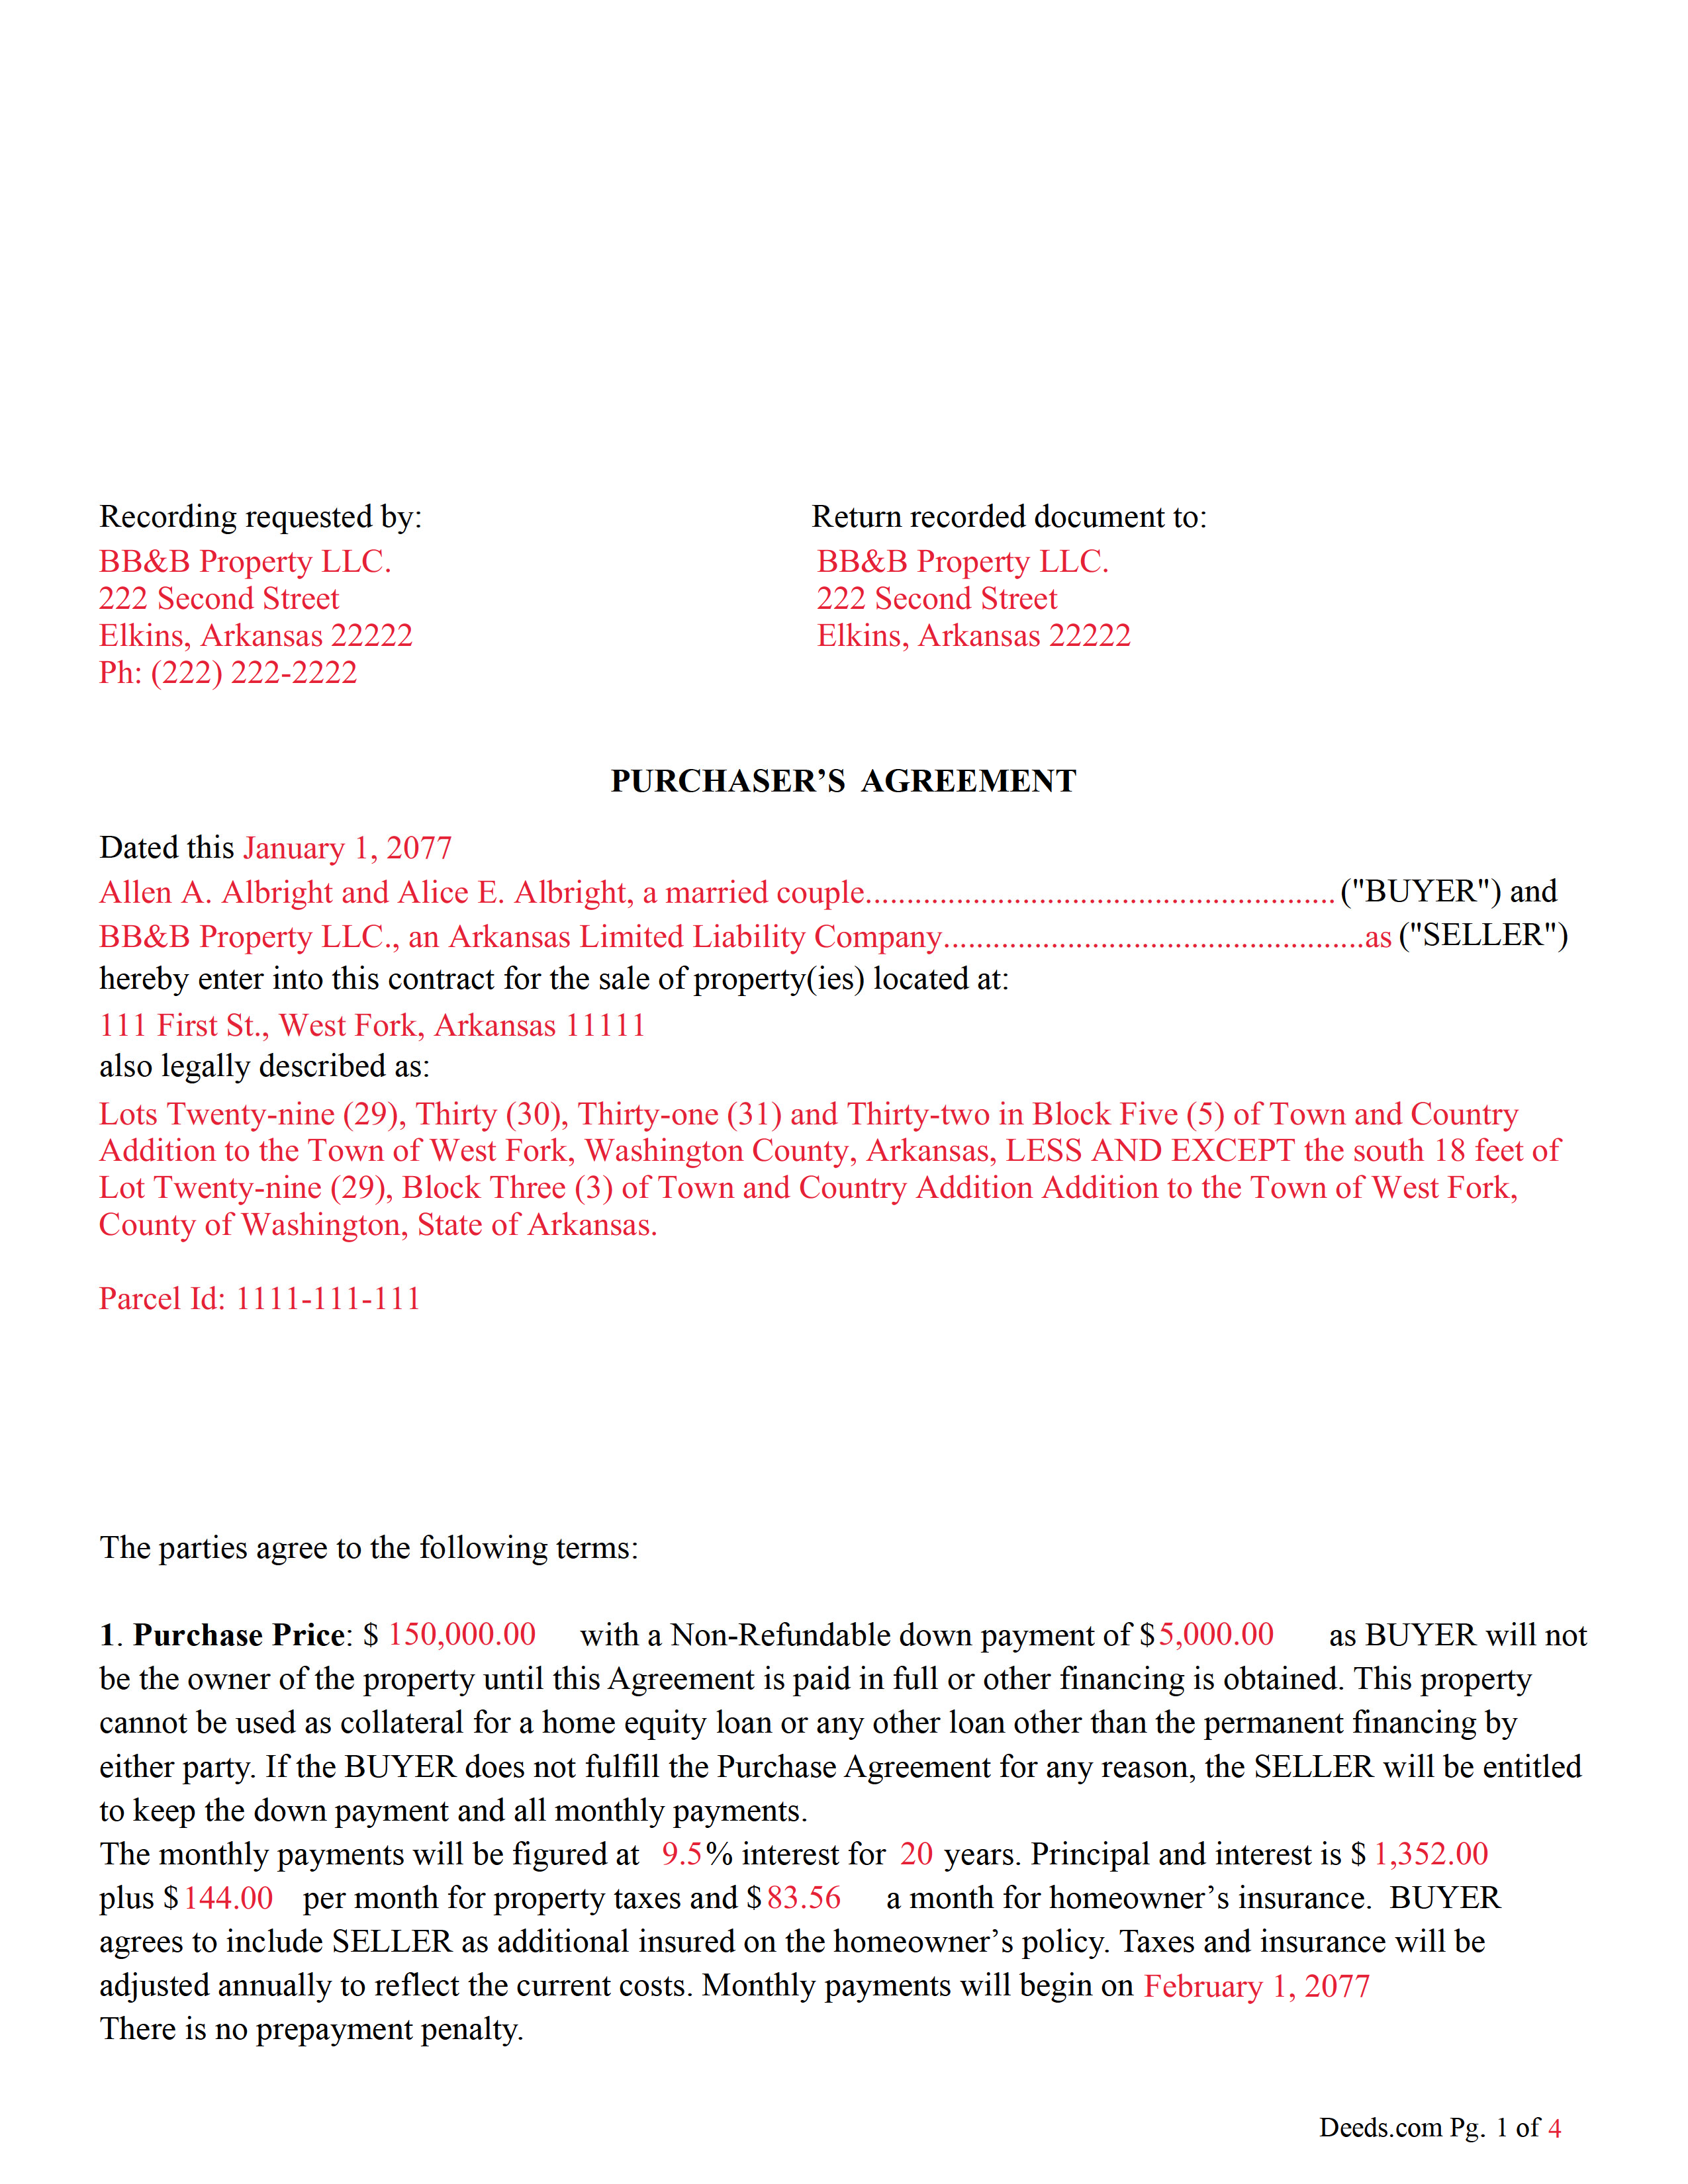 Completed Example of the Purchaser's Agreement (with installment payments) Document